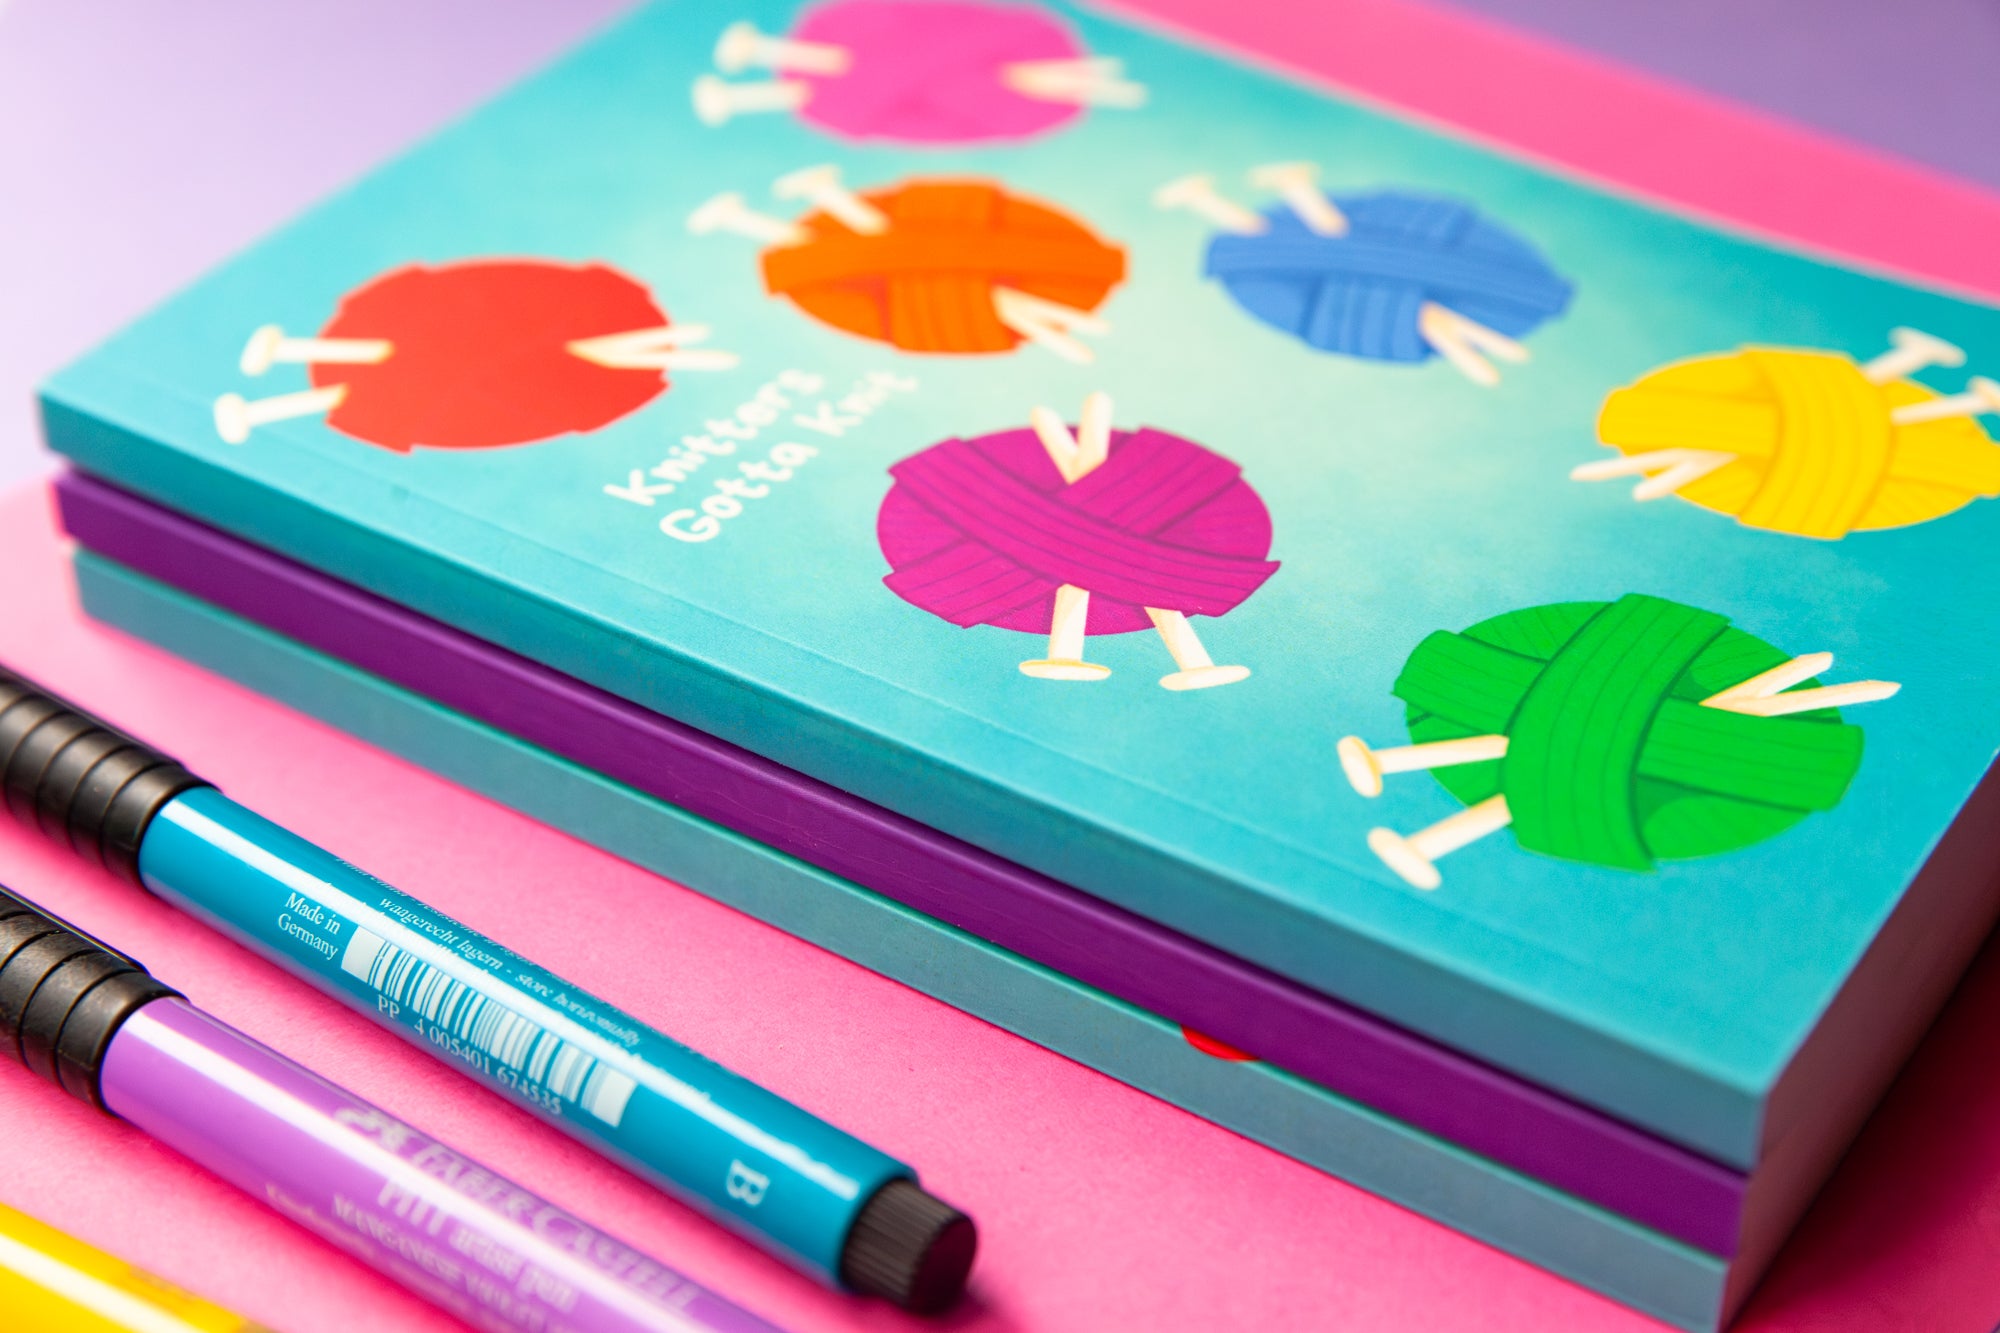 A stack of teal and purple notebooks that shows the thickness of the spine. The top notebook is teal and has an illustration of balls of yarn and knitting needles in an array of colours